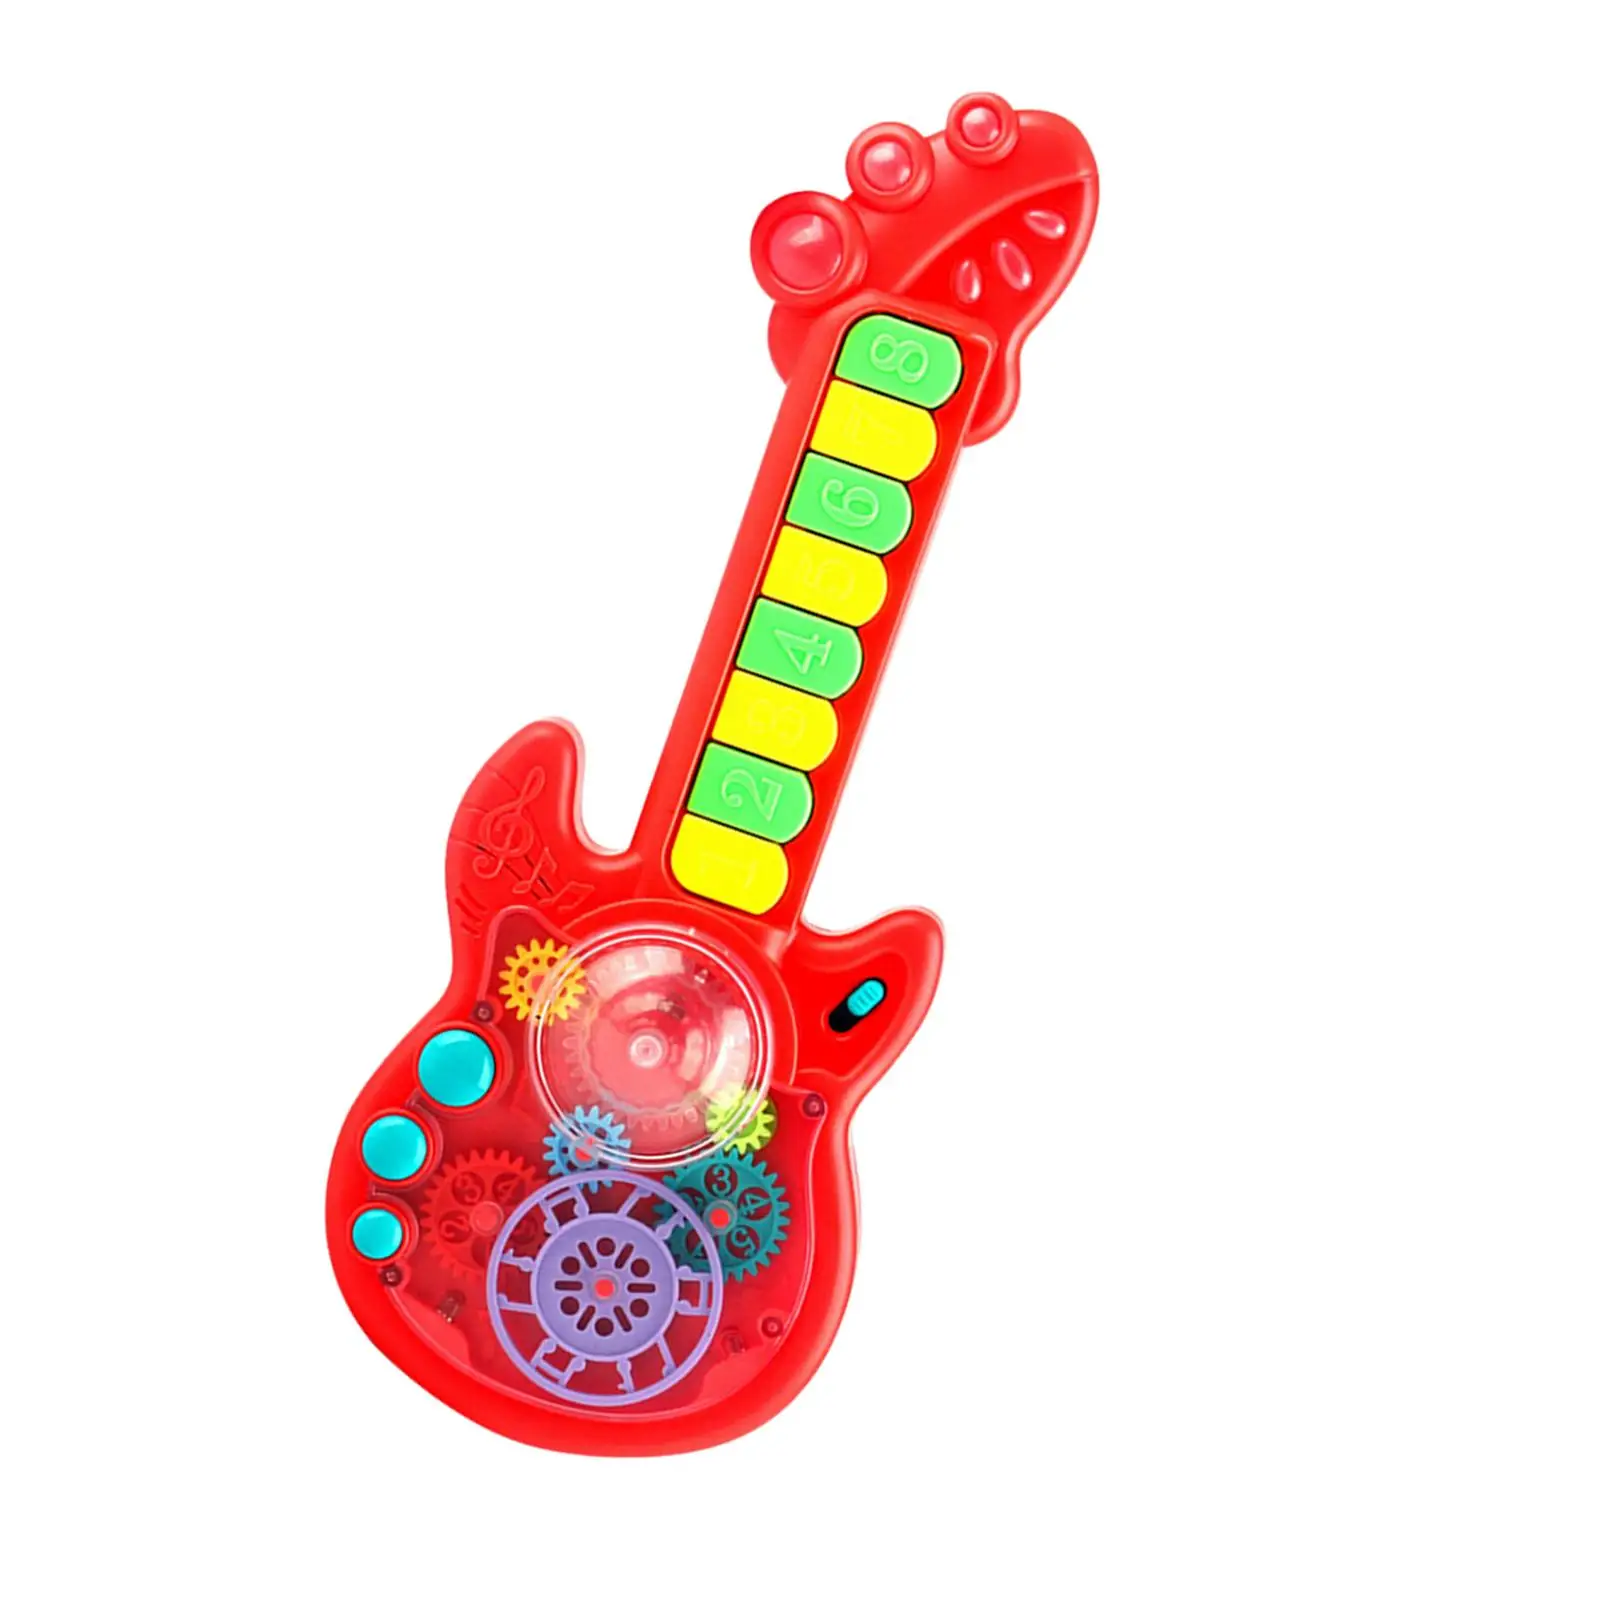 Eight Key Switches musical Guitar with Lanyard Soft Music Educational Sound Interactive Electronic Toy Guitar for gift